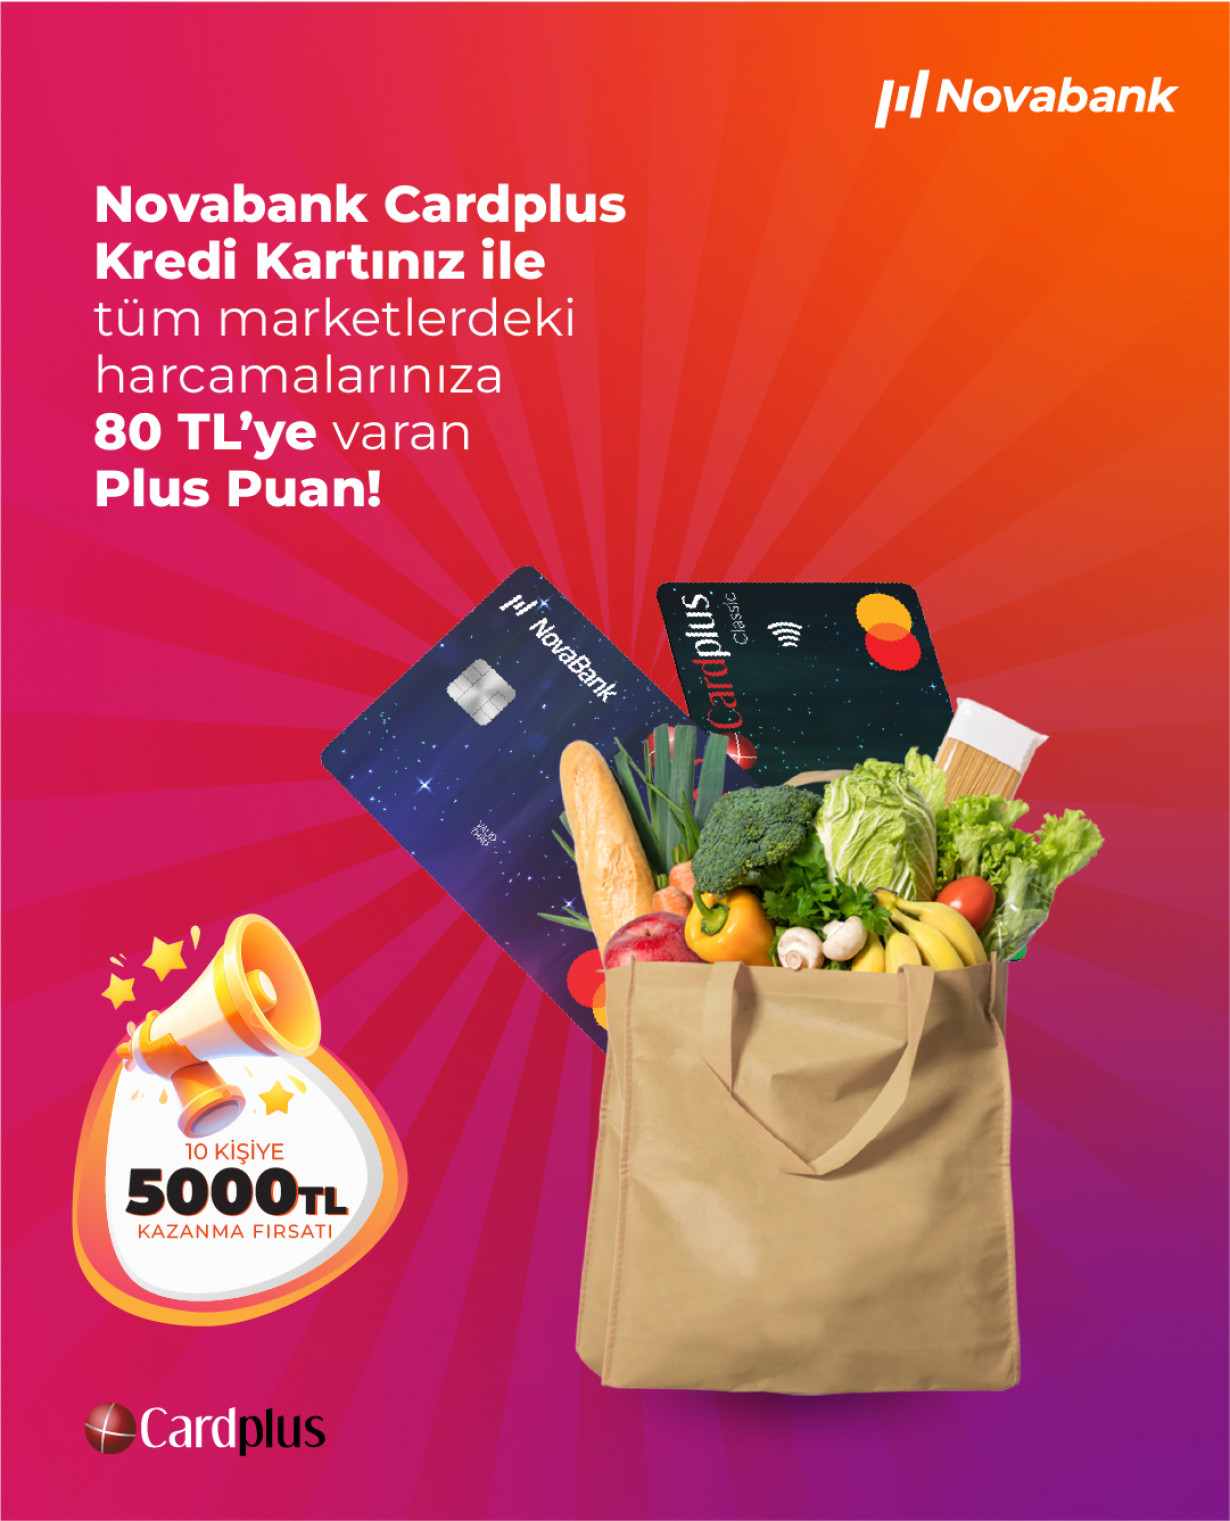 Earn points and 5000 TL for 10 people with Novabank Cardplus Credit Cards in all markets!